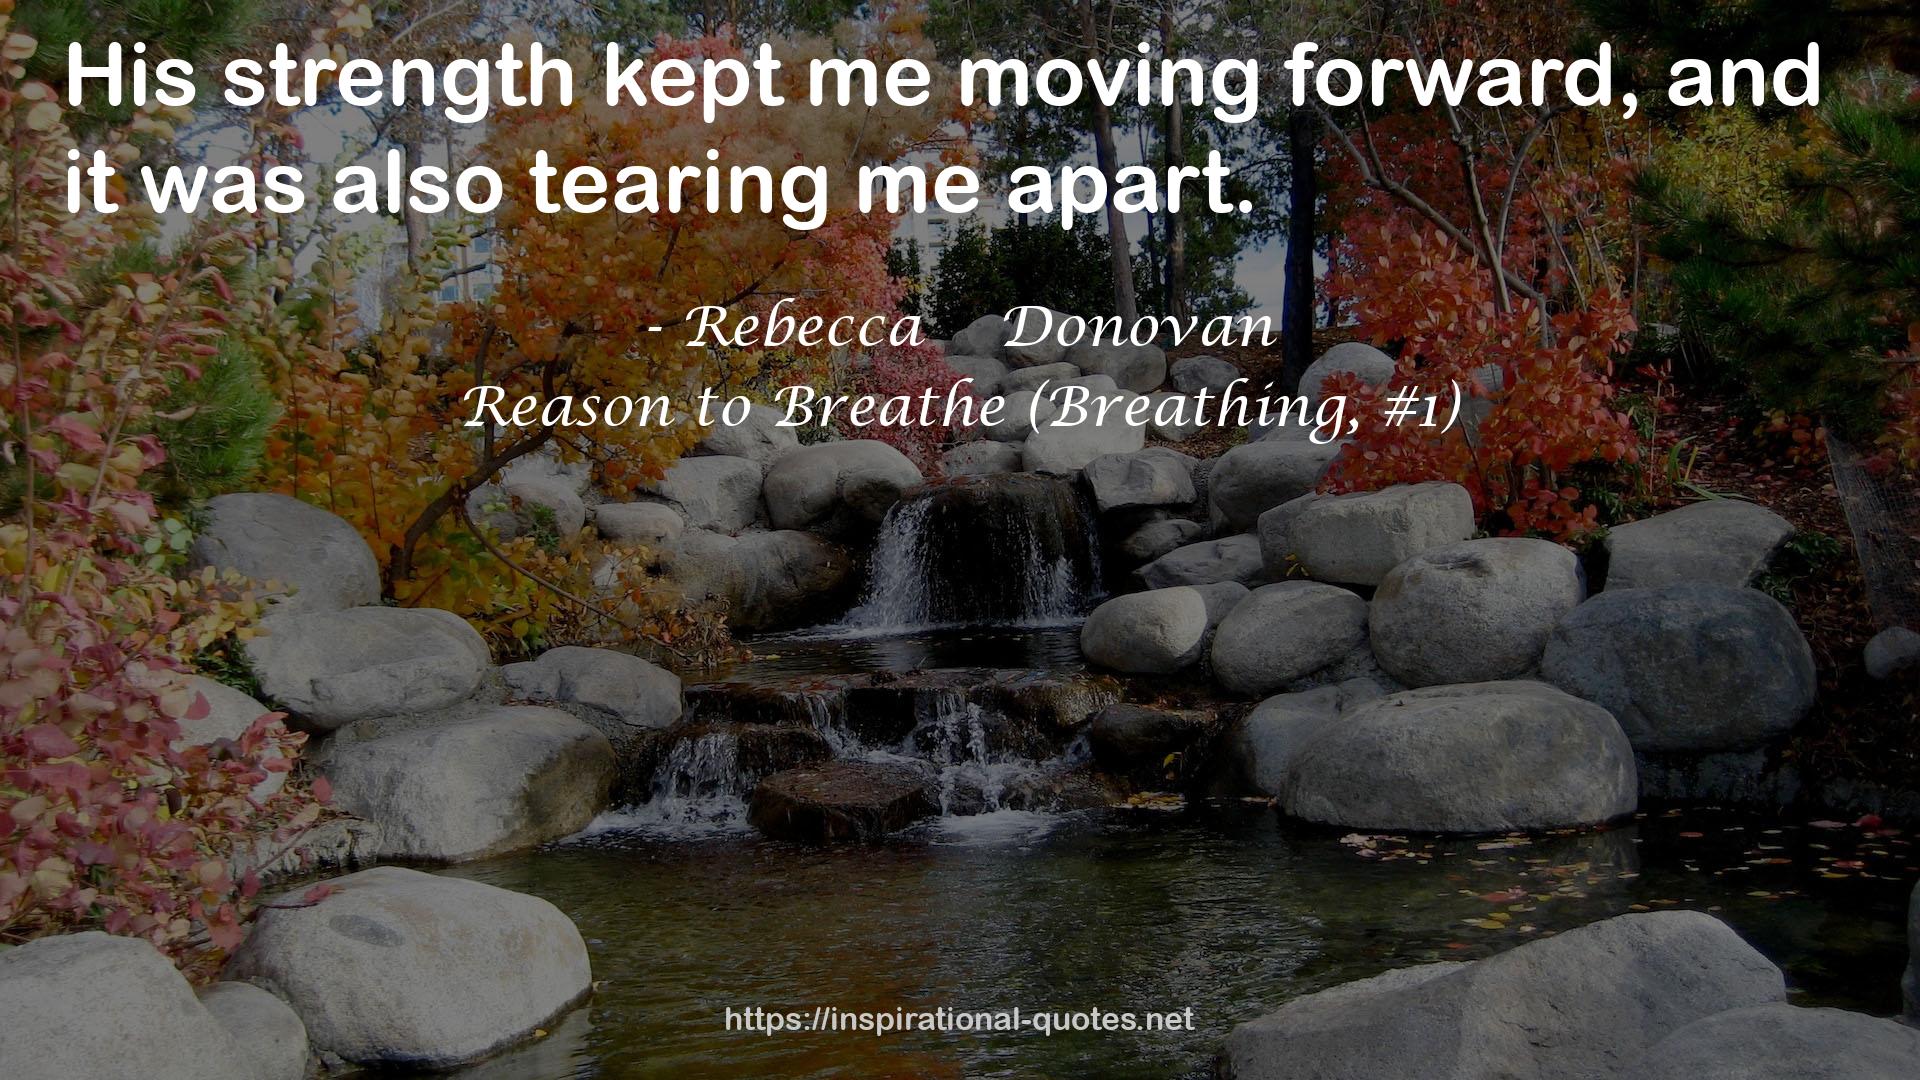 Reason to Breathe (Breathing, #1) QUOTES